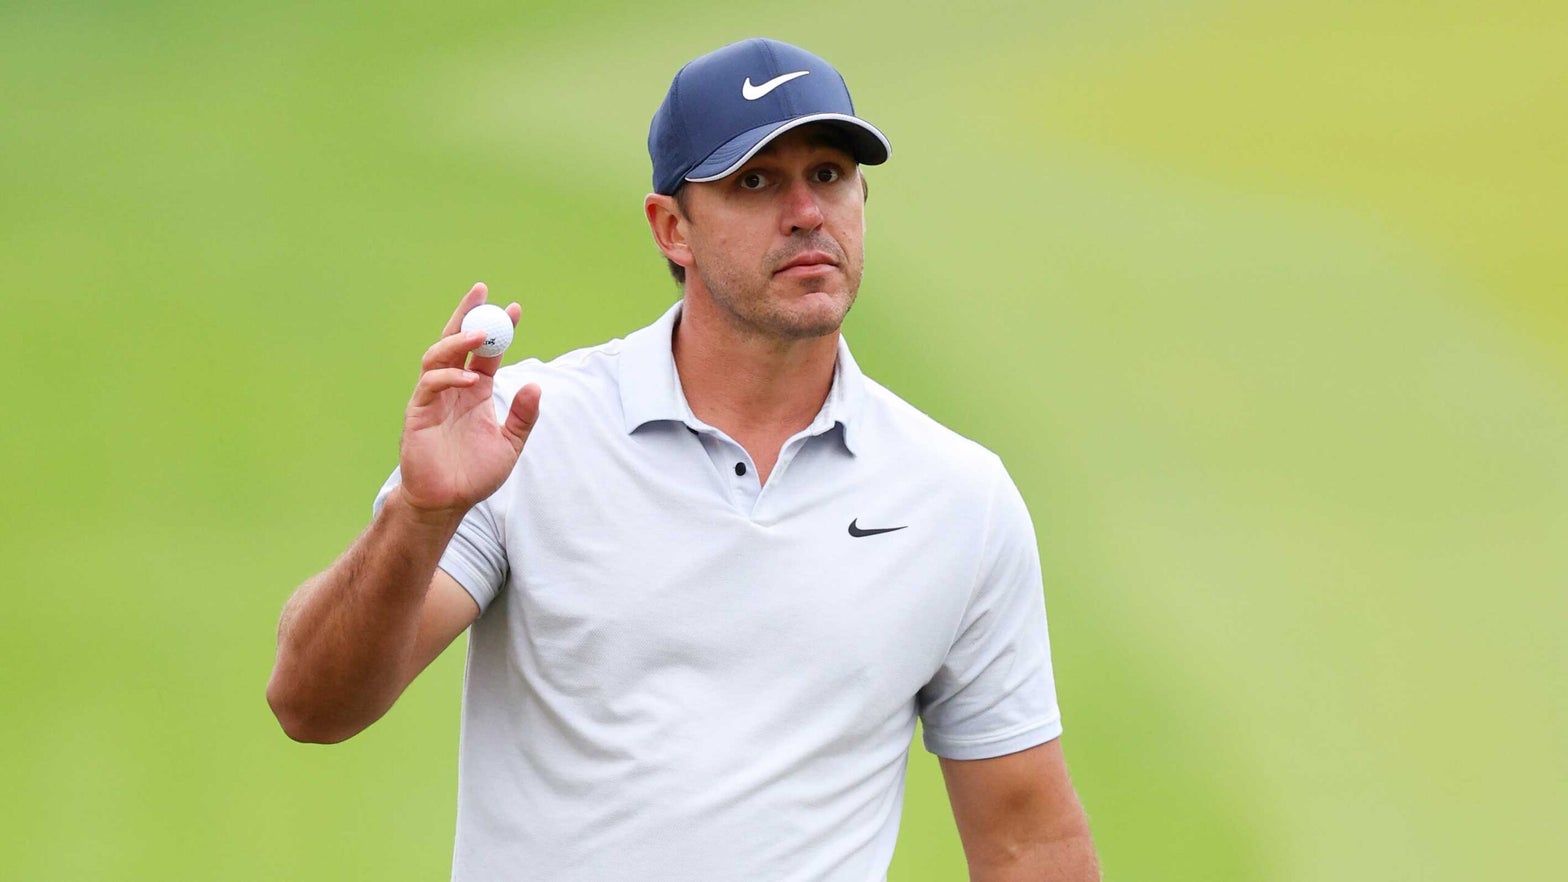 After Masters 'choke,' Brooks Koepka couldn't sleep. Now, redemption awaits